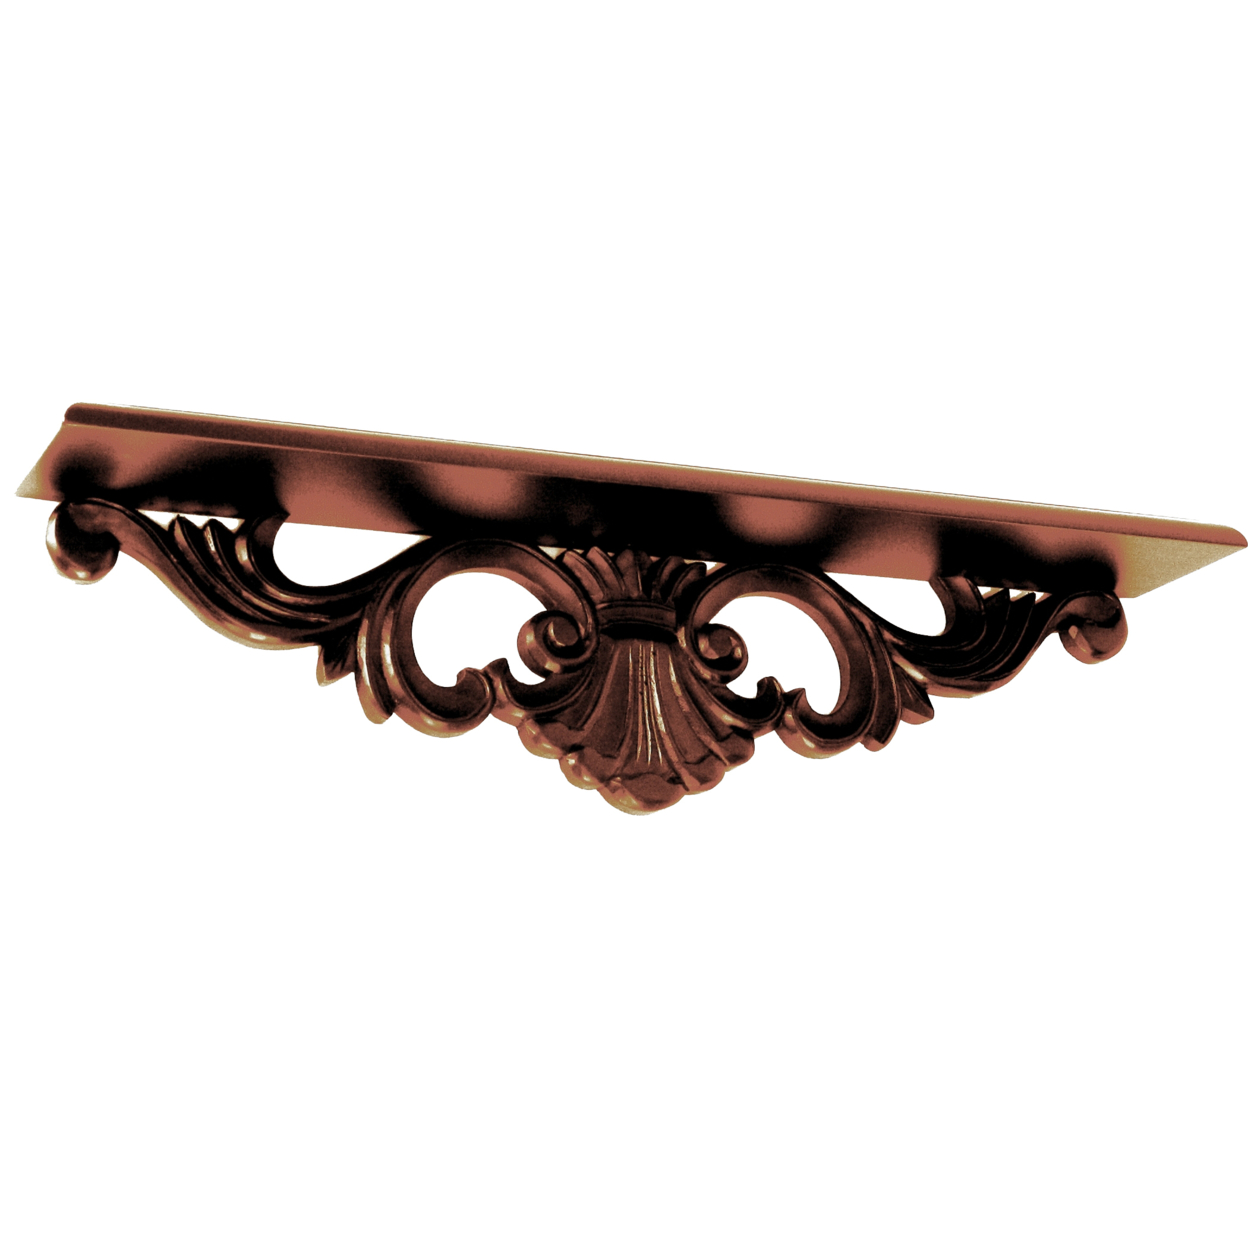 Hand Carved Wooden Wall Shelf With Floral Design Display, Brown- Saltoro Sherpi